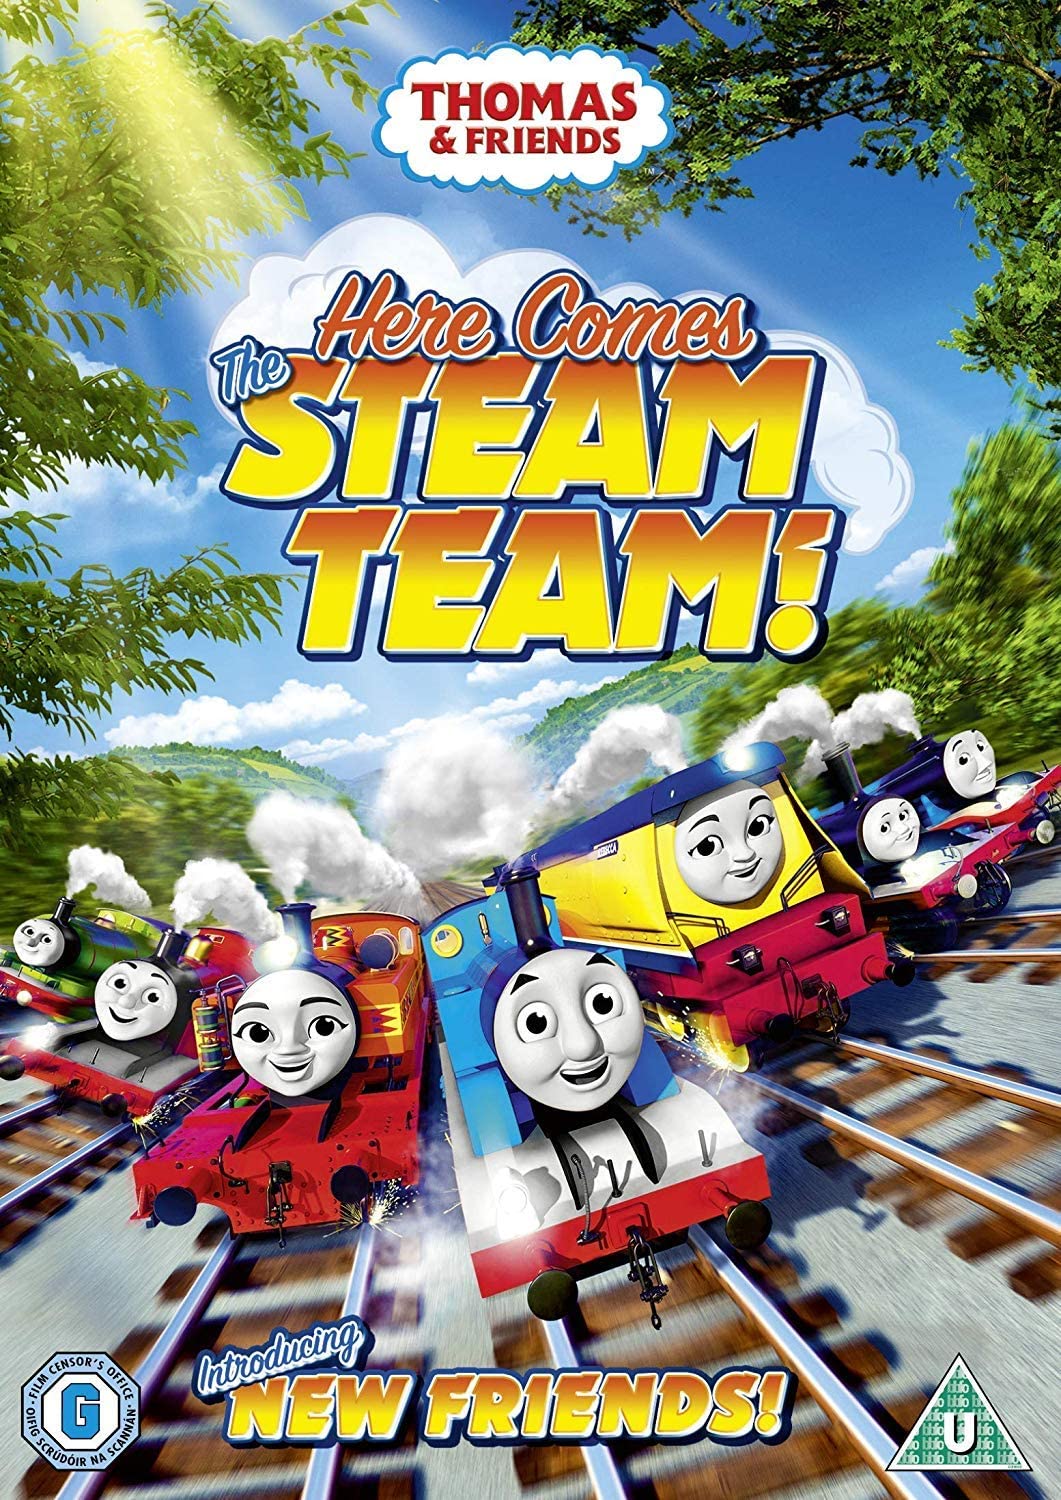 Thomas & Friends - Here Comes the Steam Team [DVD]